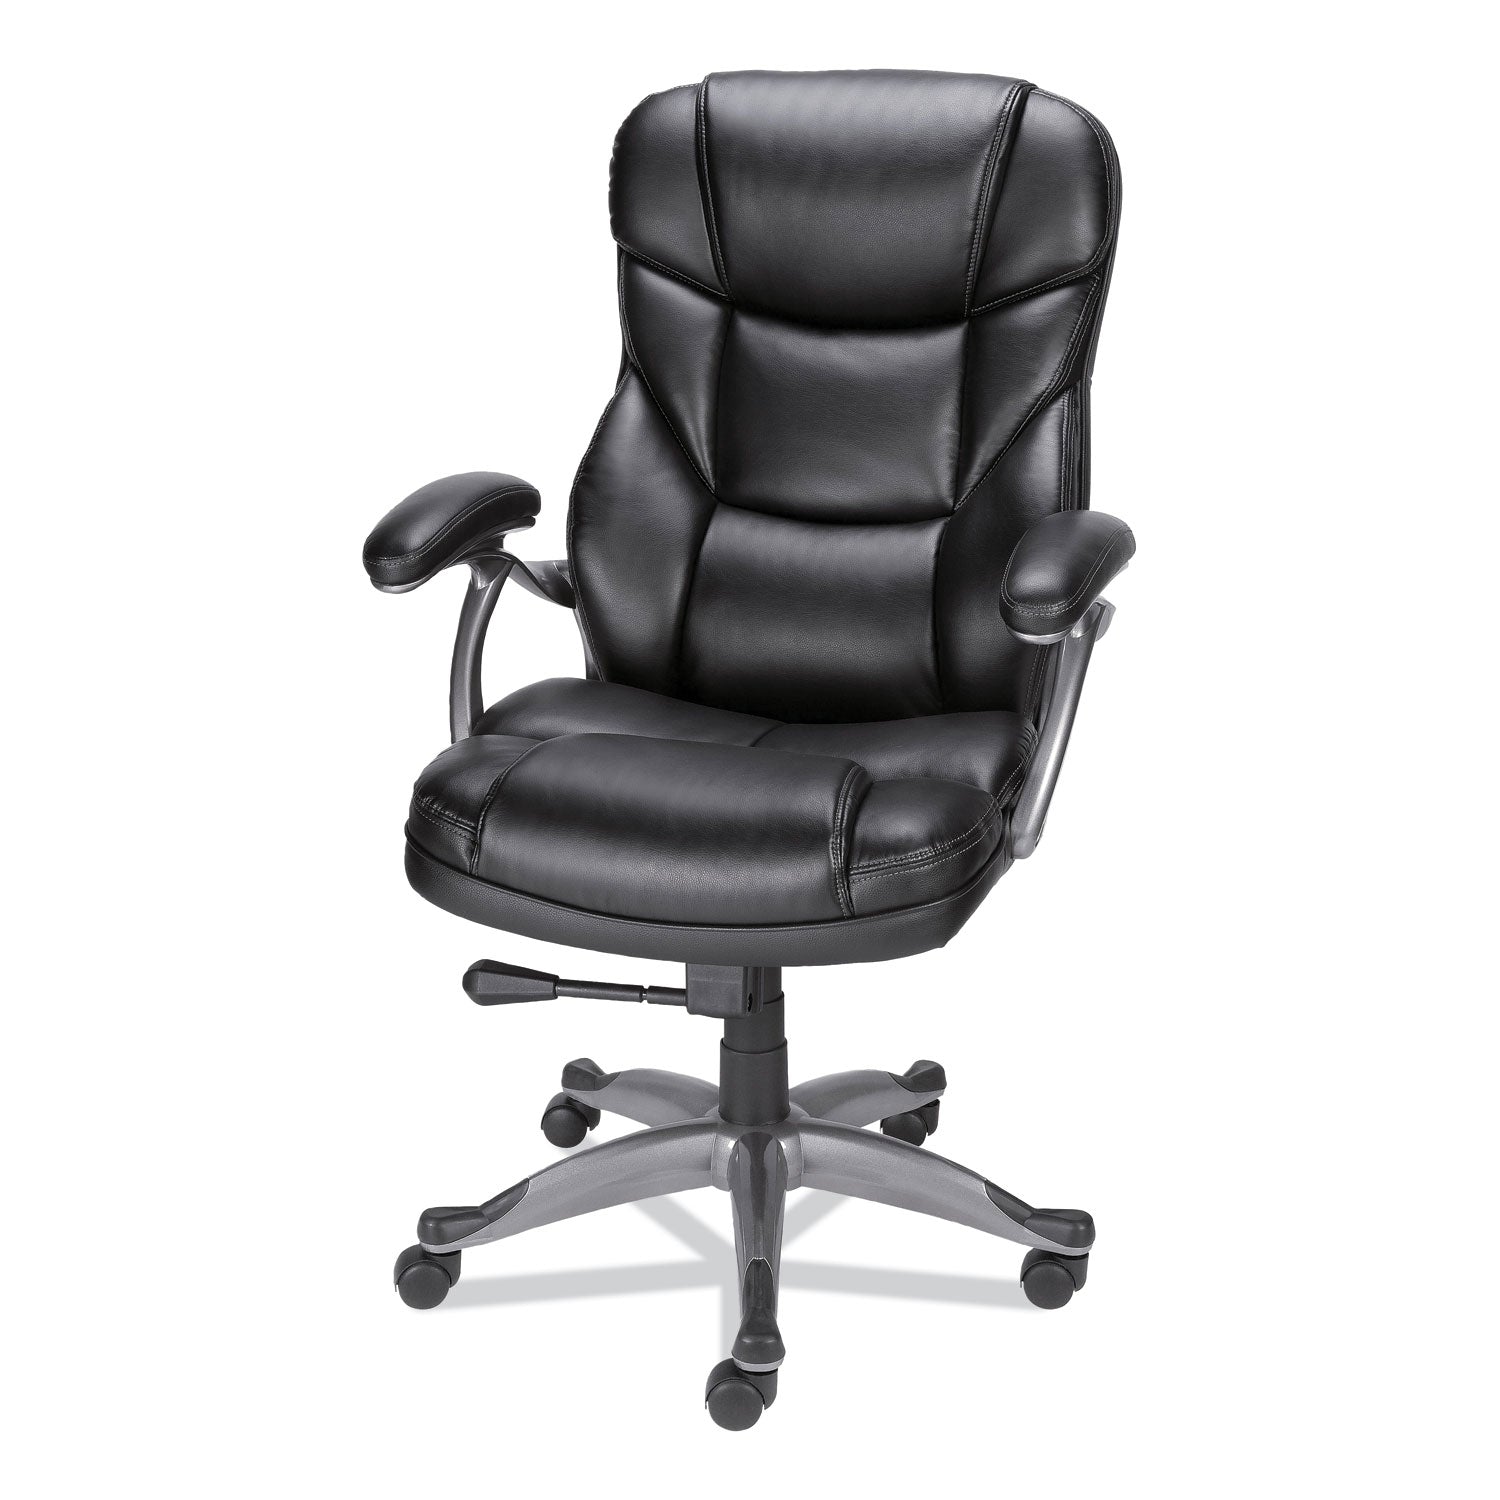 alera-birns-series-high-back-task-chair-supports-up-to-250-lb-1811-to-2205-seat-height-black-seat-back-chrome-base_alebn41b19 - 6